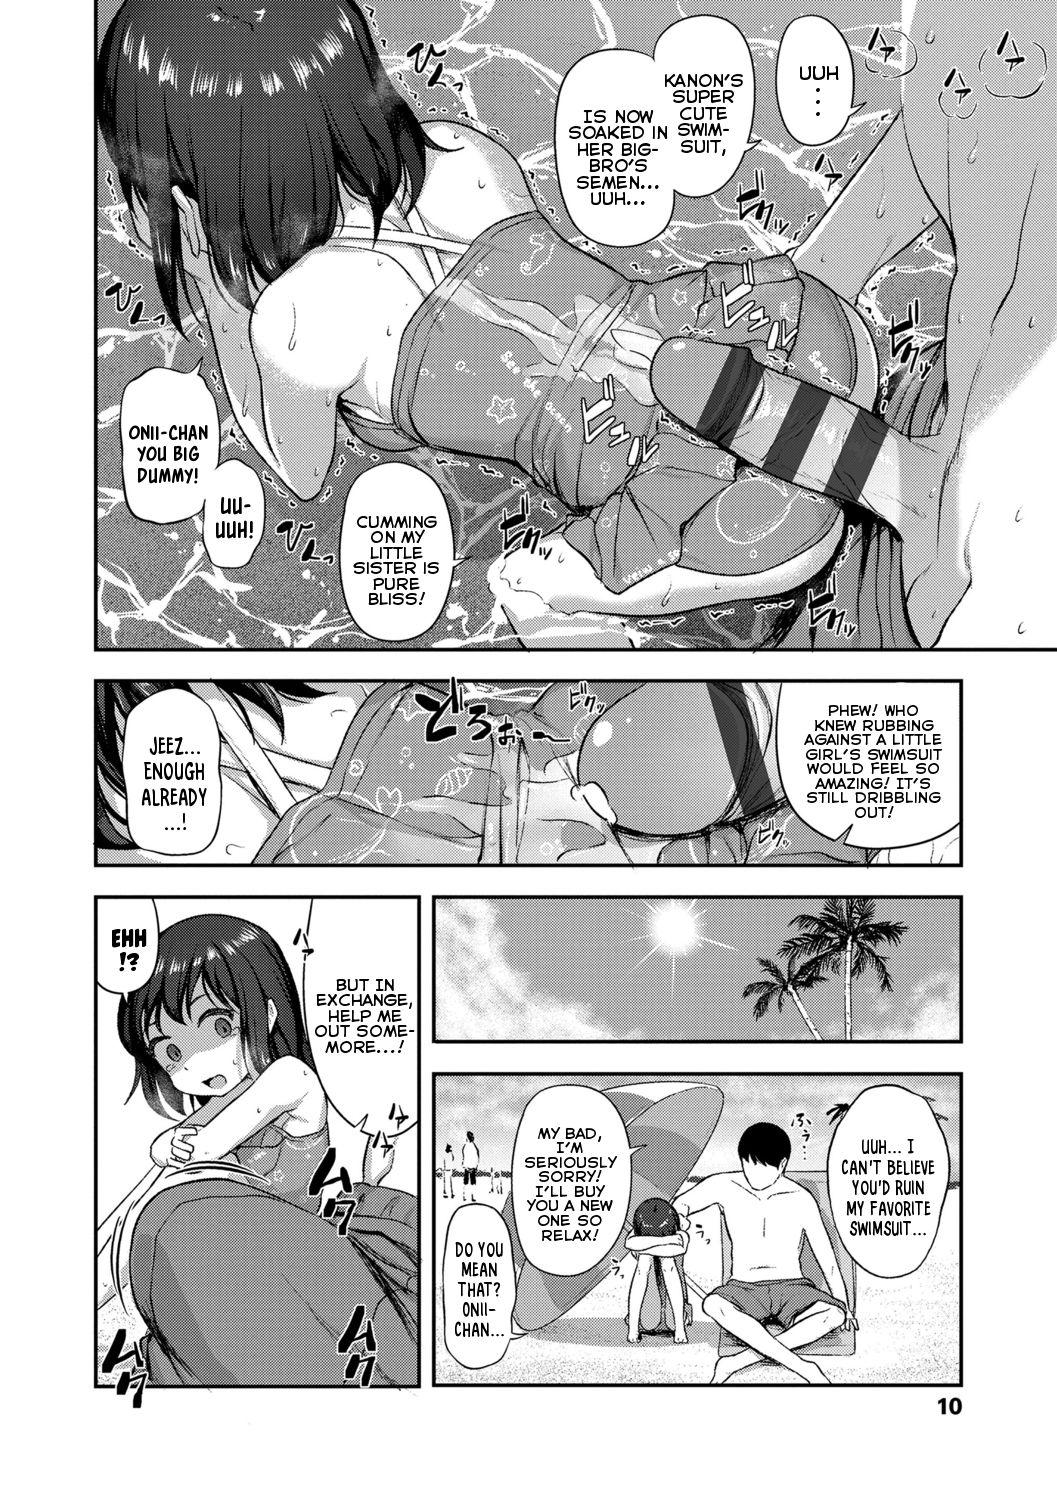 Black Cock [Hayake] Imouto no Hadaka o Mite Koufun Suru nante Hen na Onii-chan | What Kind of Weirdo Onii-chan Gets Excited From Seeing His Little Sister Naked? [English] [Mistvern + Shippoyasha] [Digital] Ass Fucking - Page 12